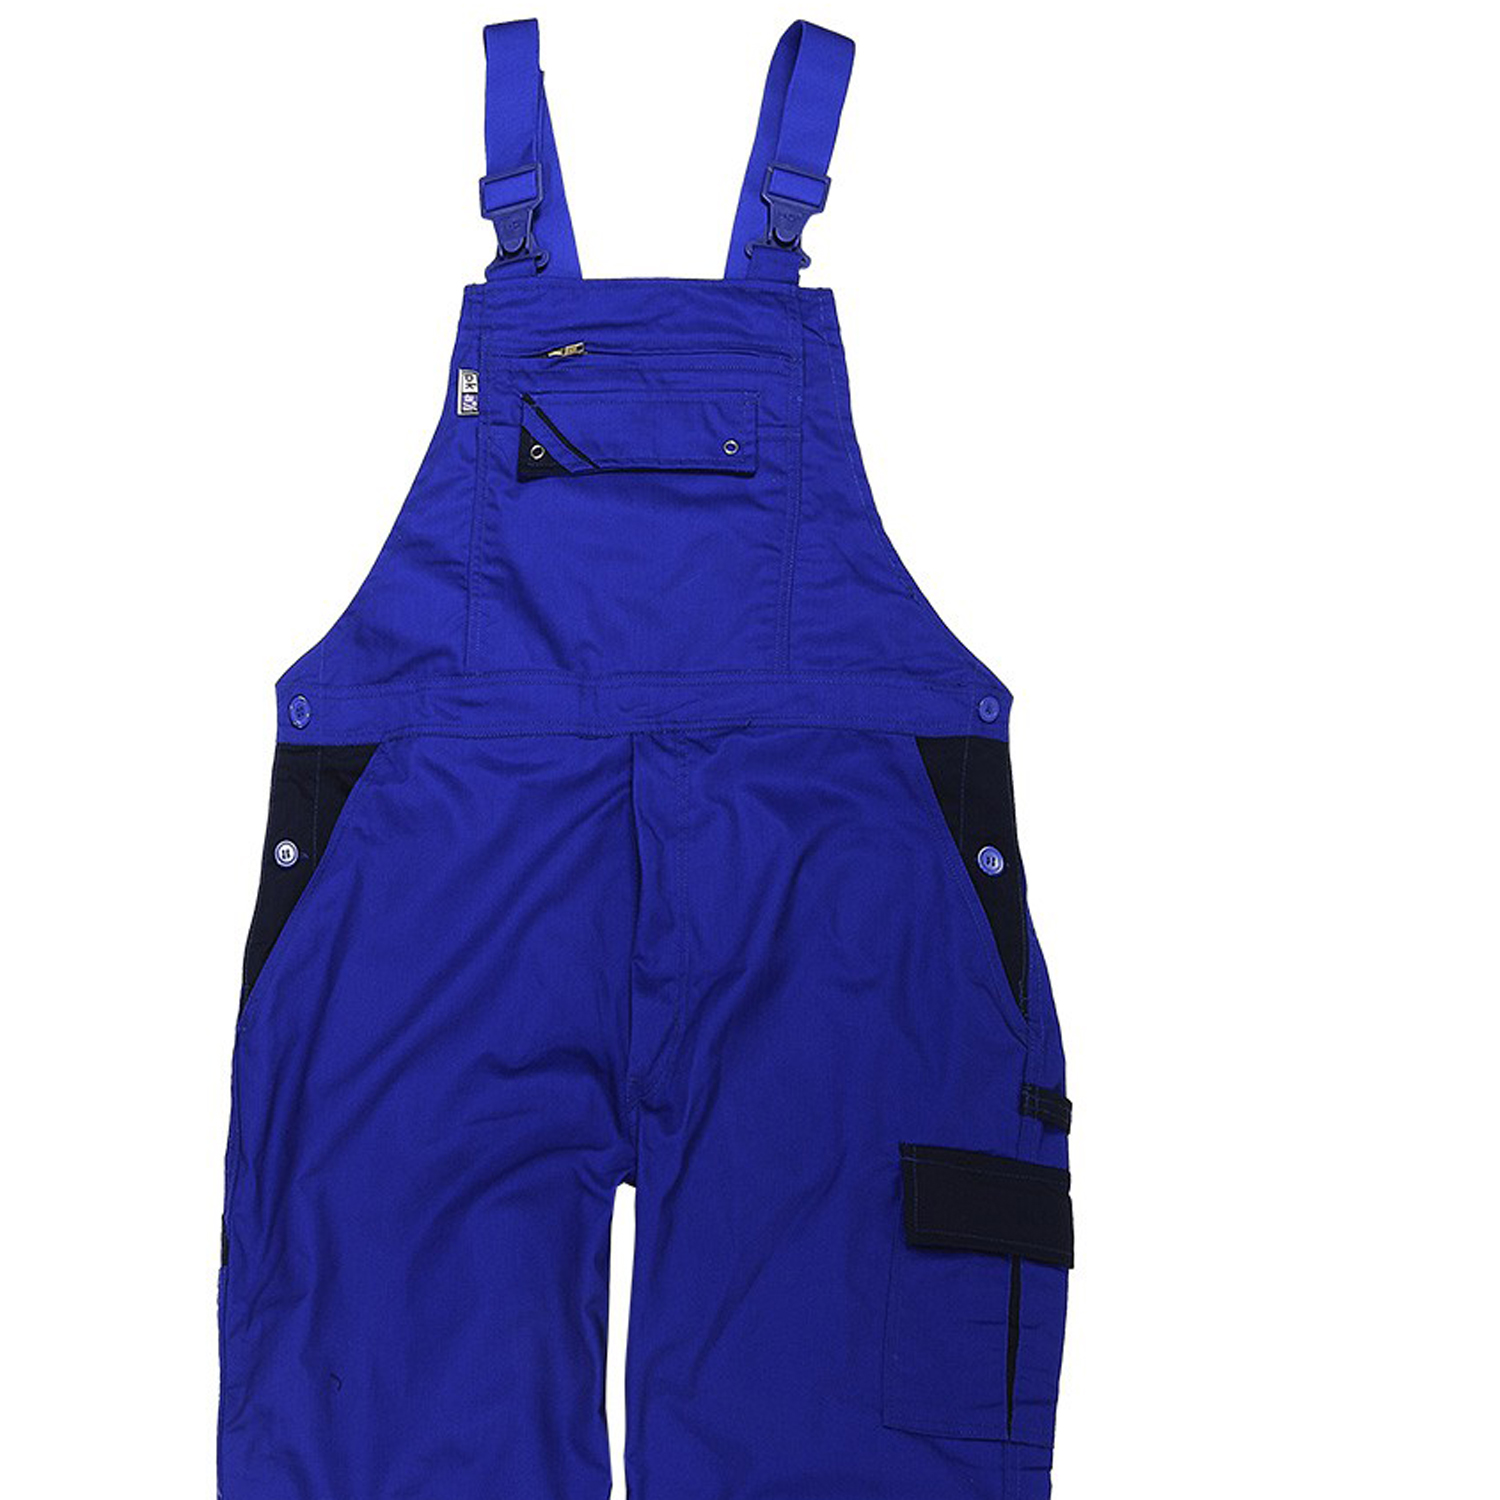 Workingclothes, Pants by PKA Klöcker in blue, large sizes up to 74